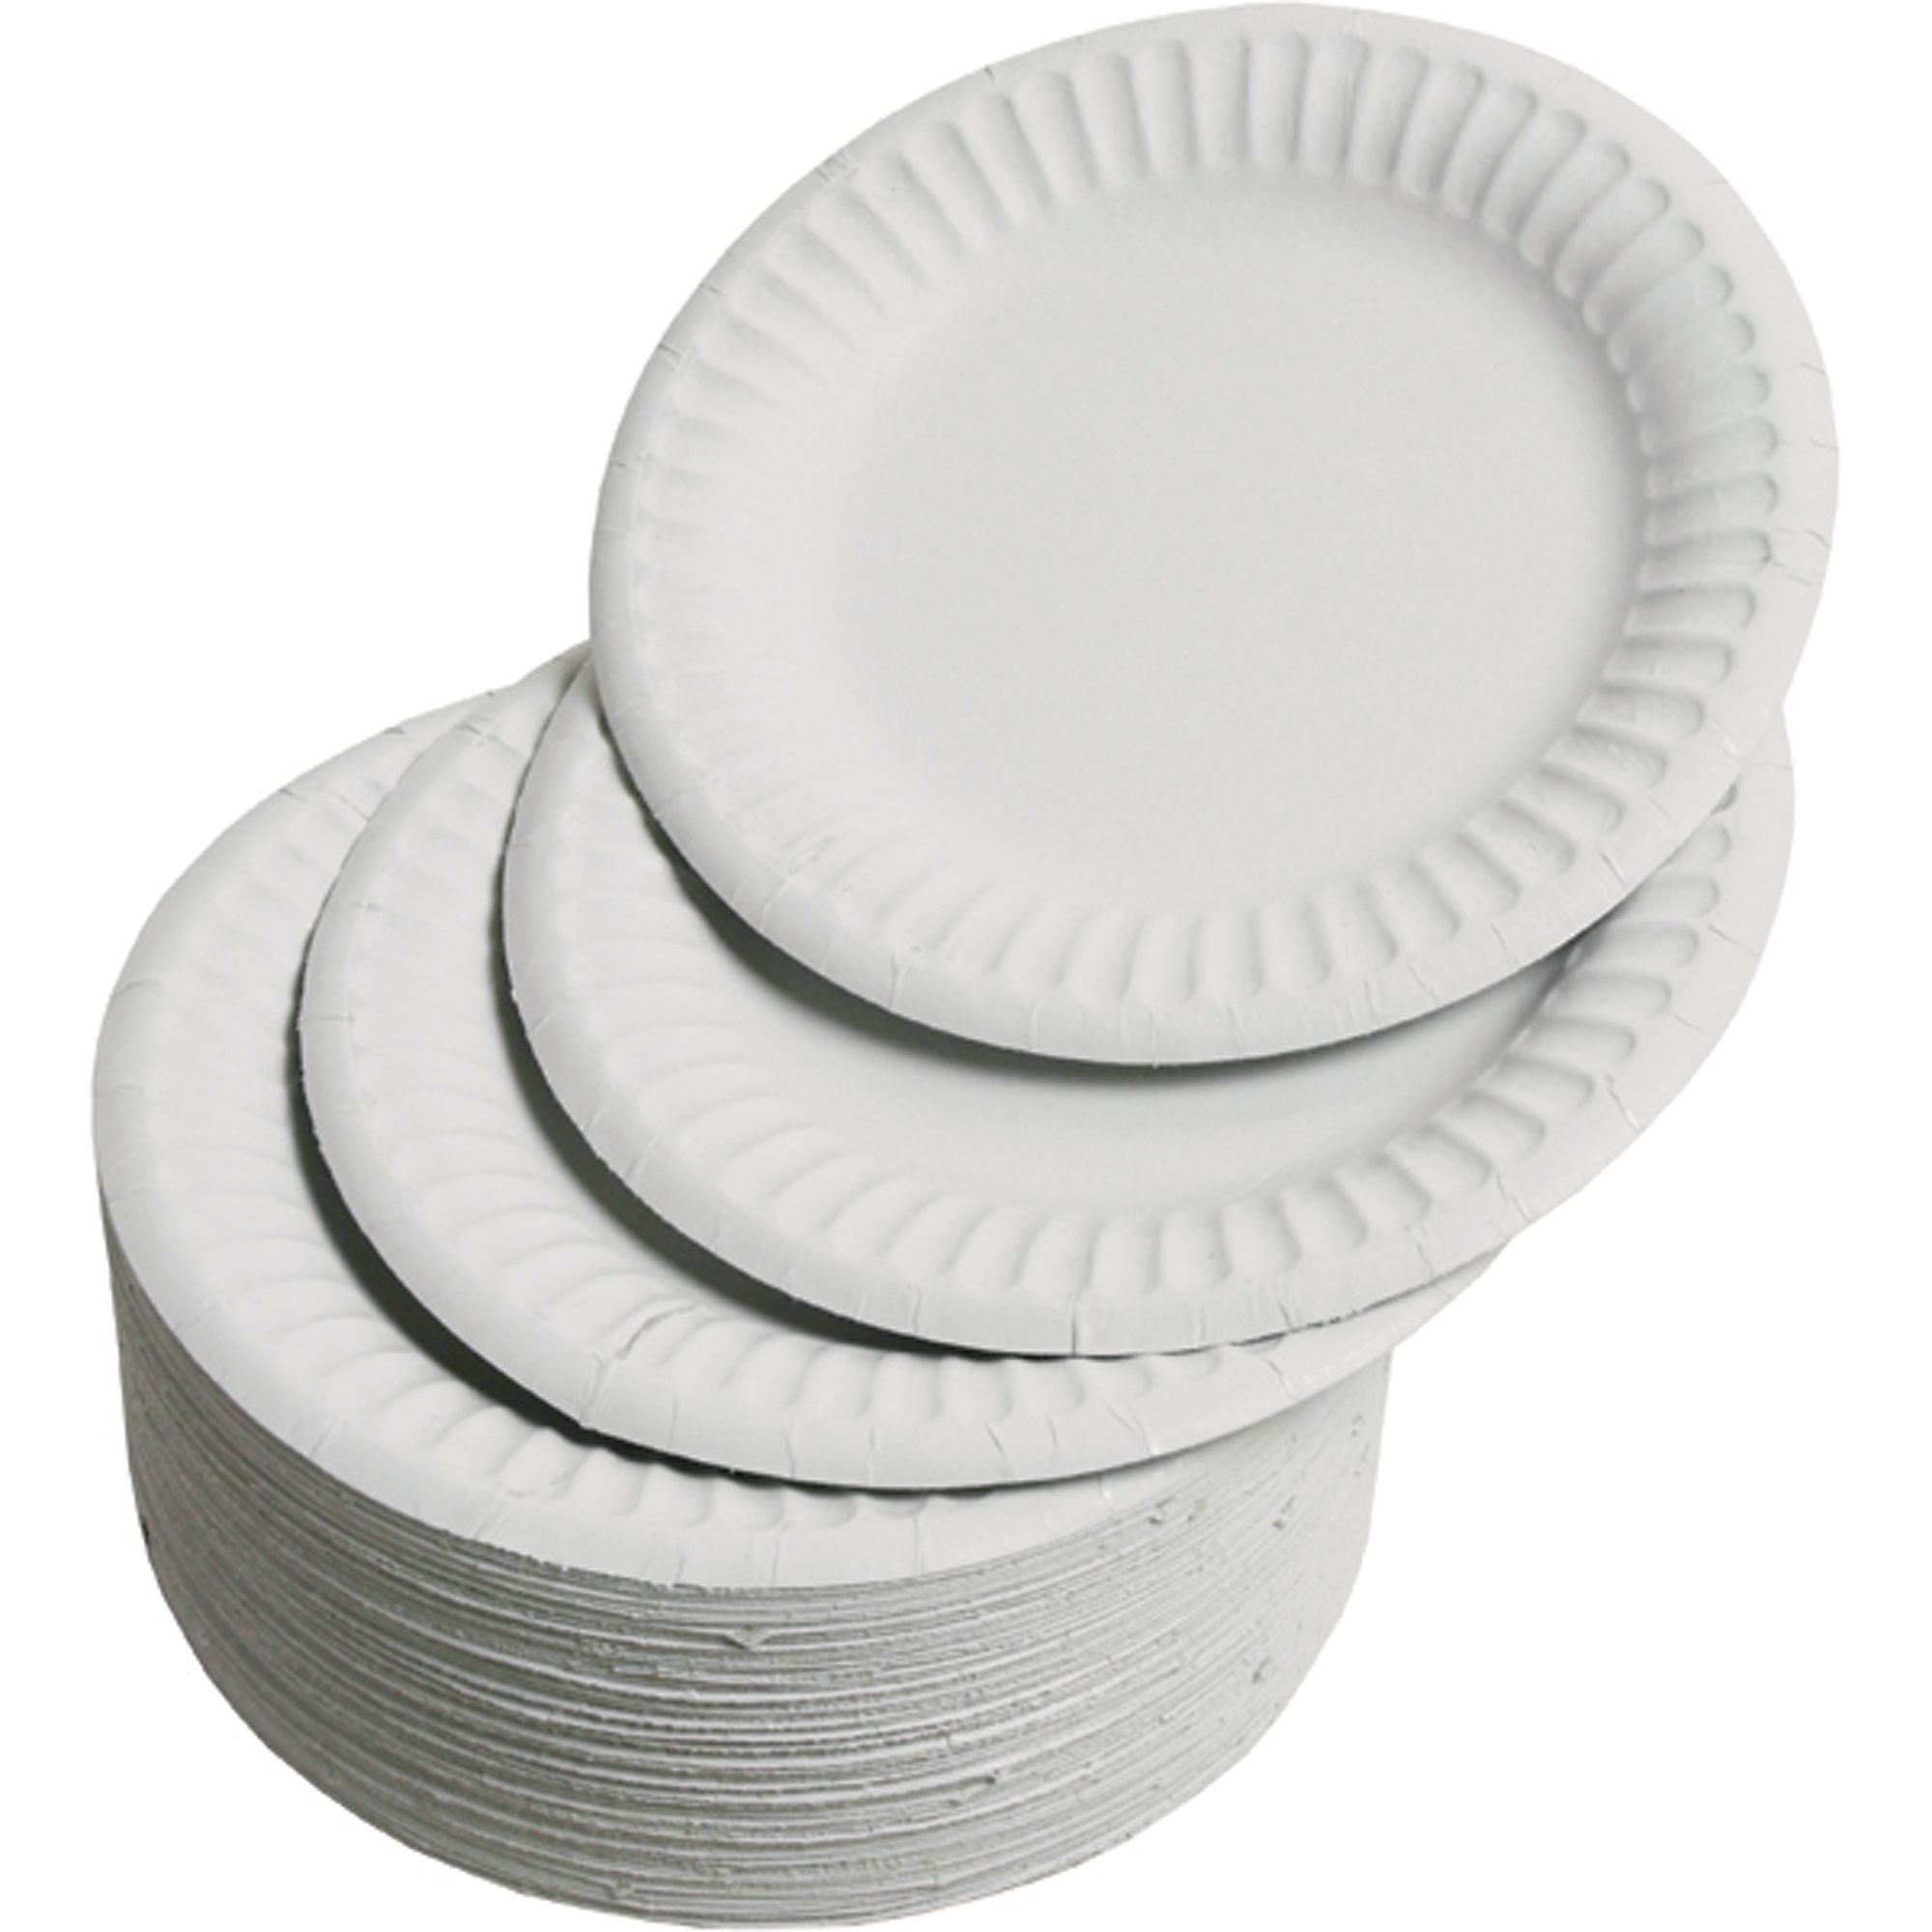 he469410-paper-plates-180mm-white-pack-of-1000-findel-education